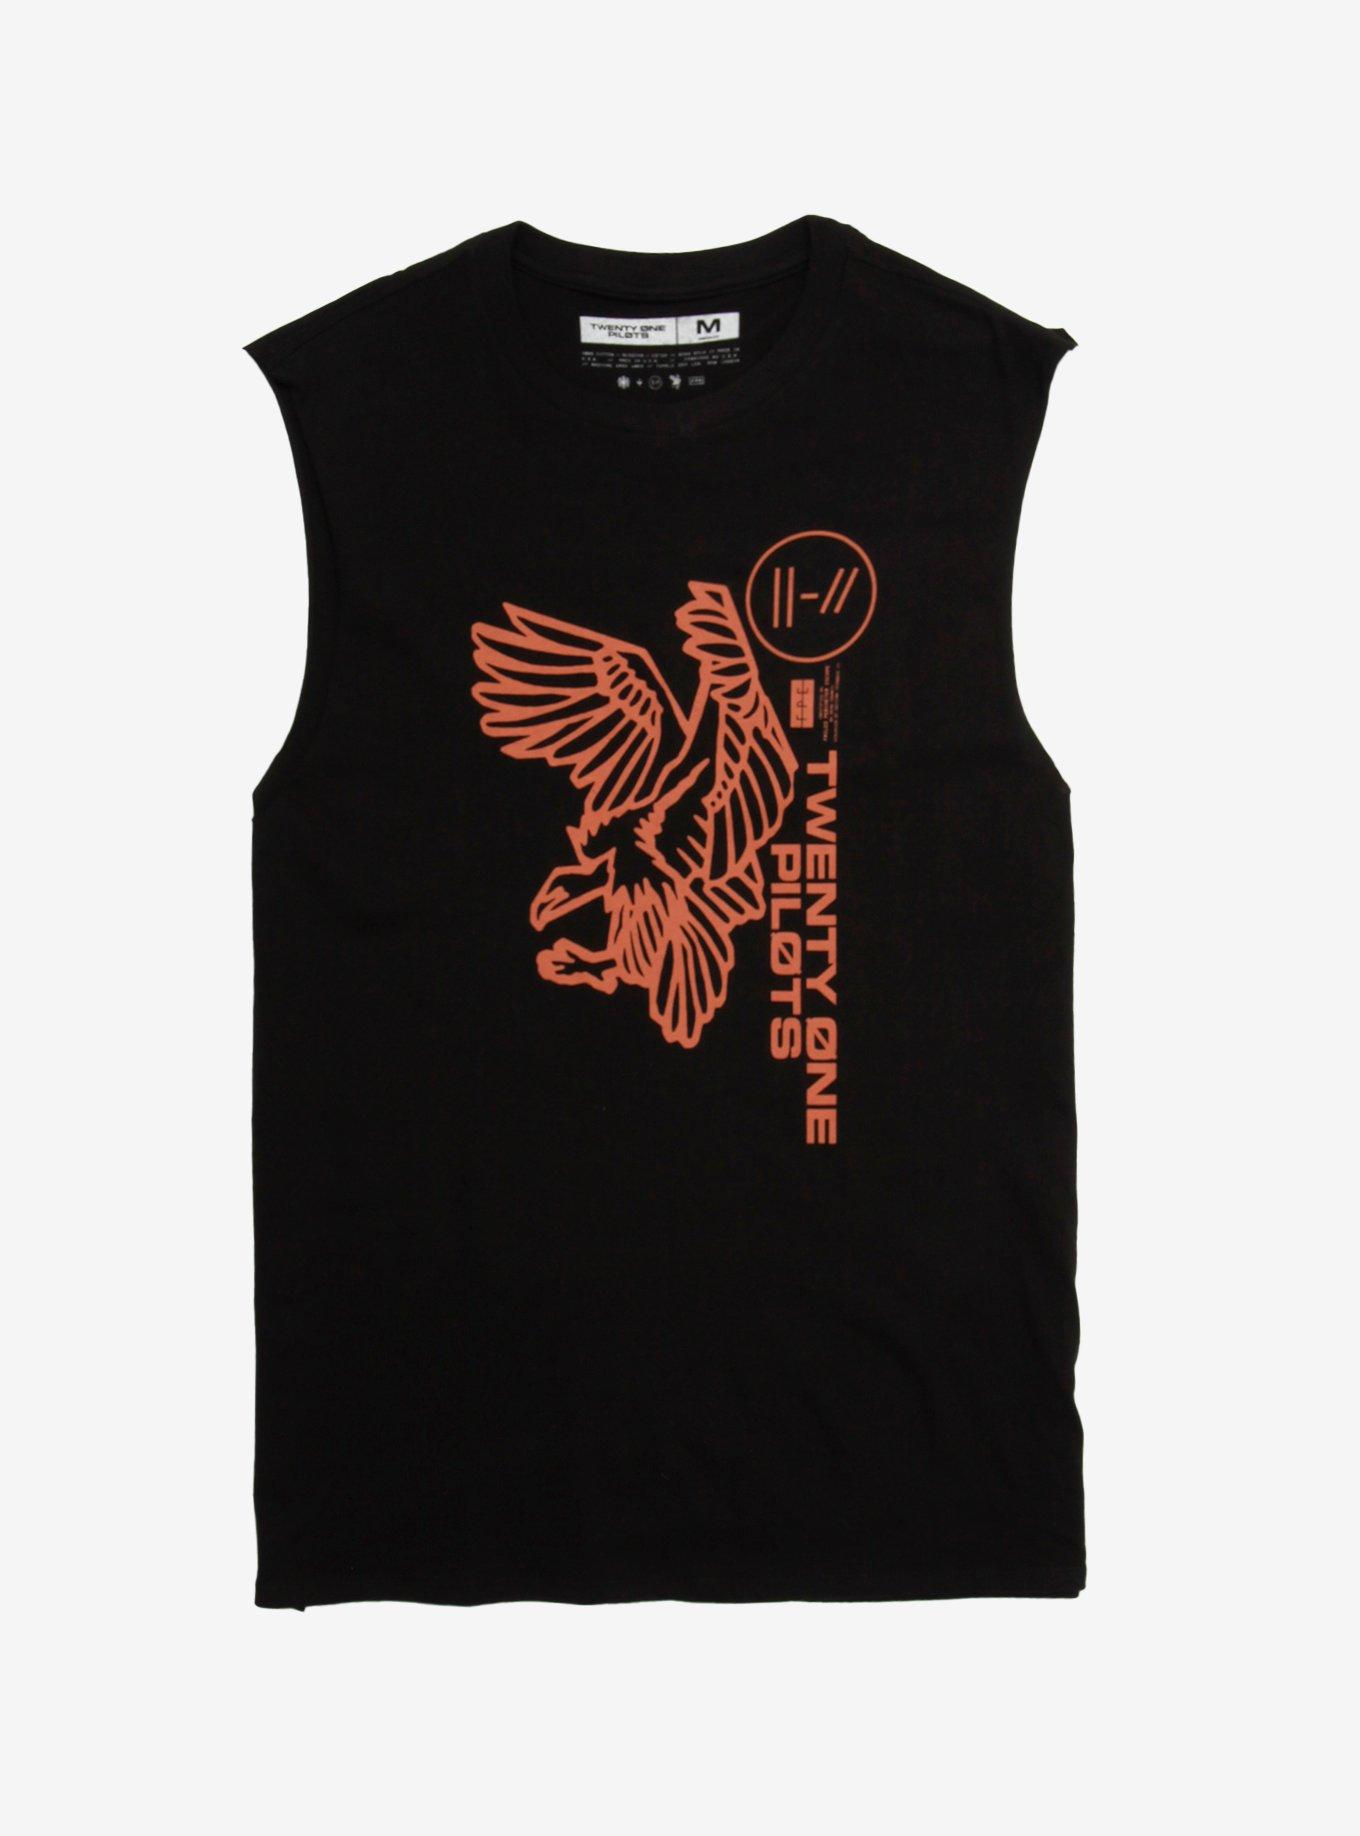 Twenty One Pilots Trench Vulture Muscle T-Shirt | Hot Topic